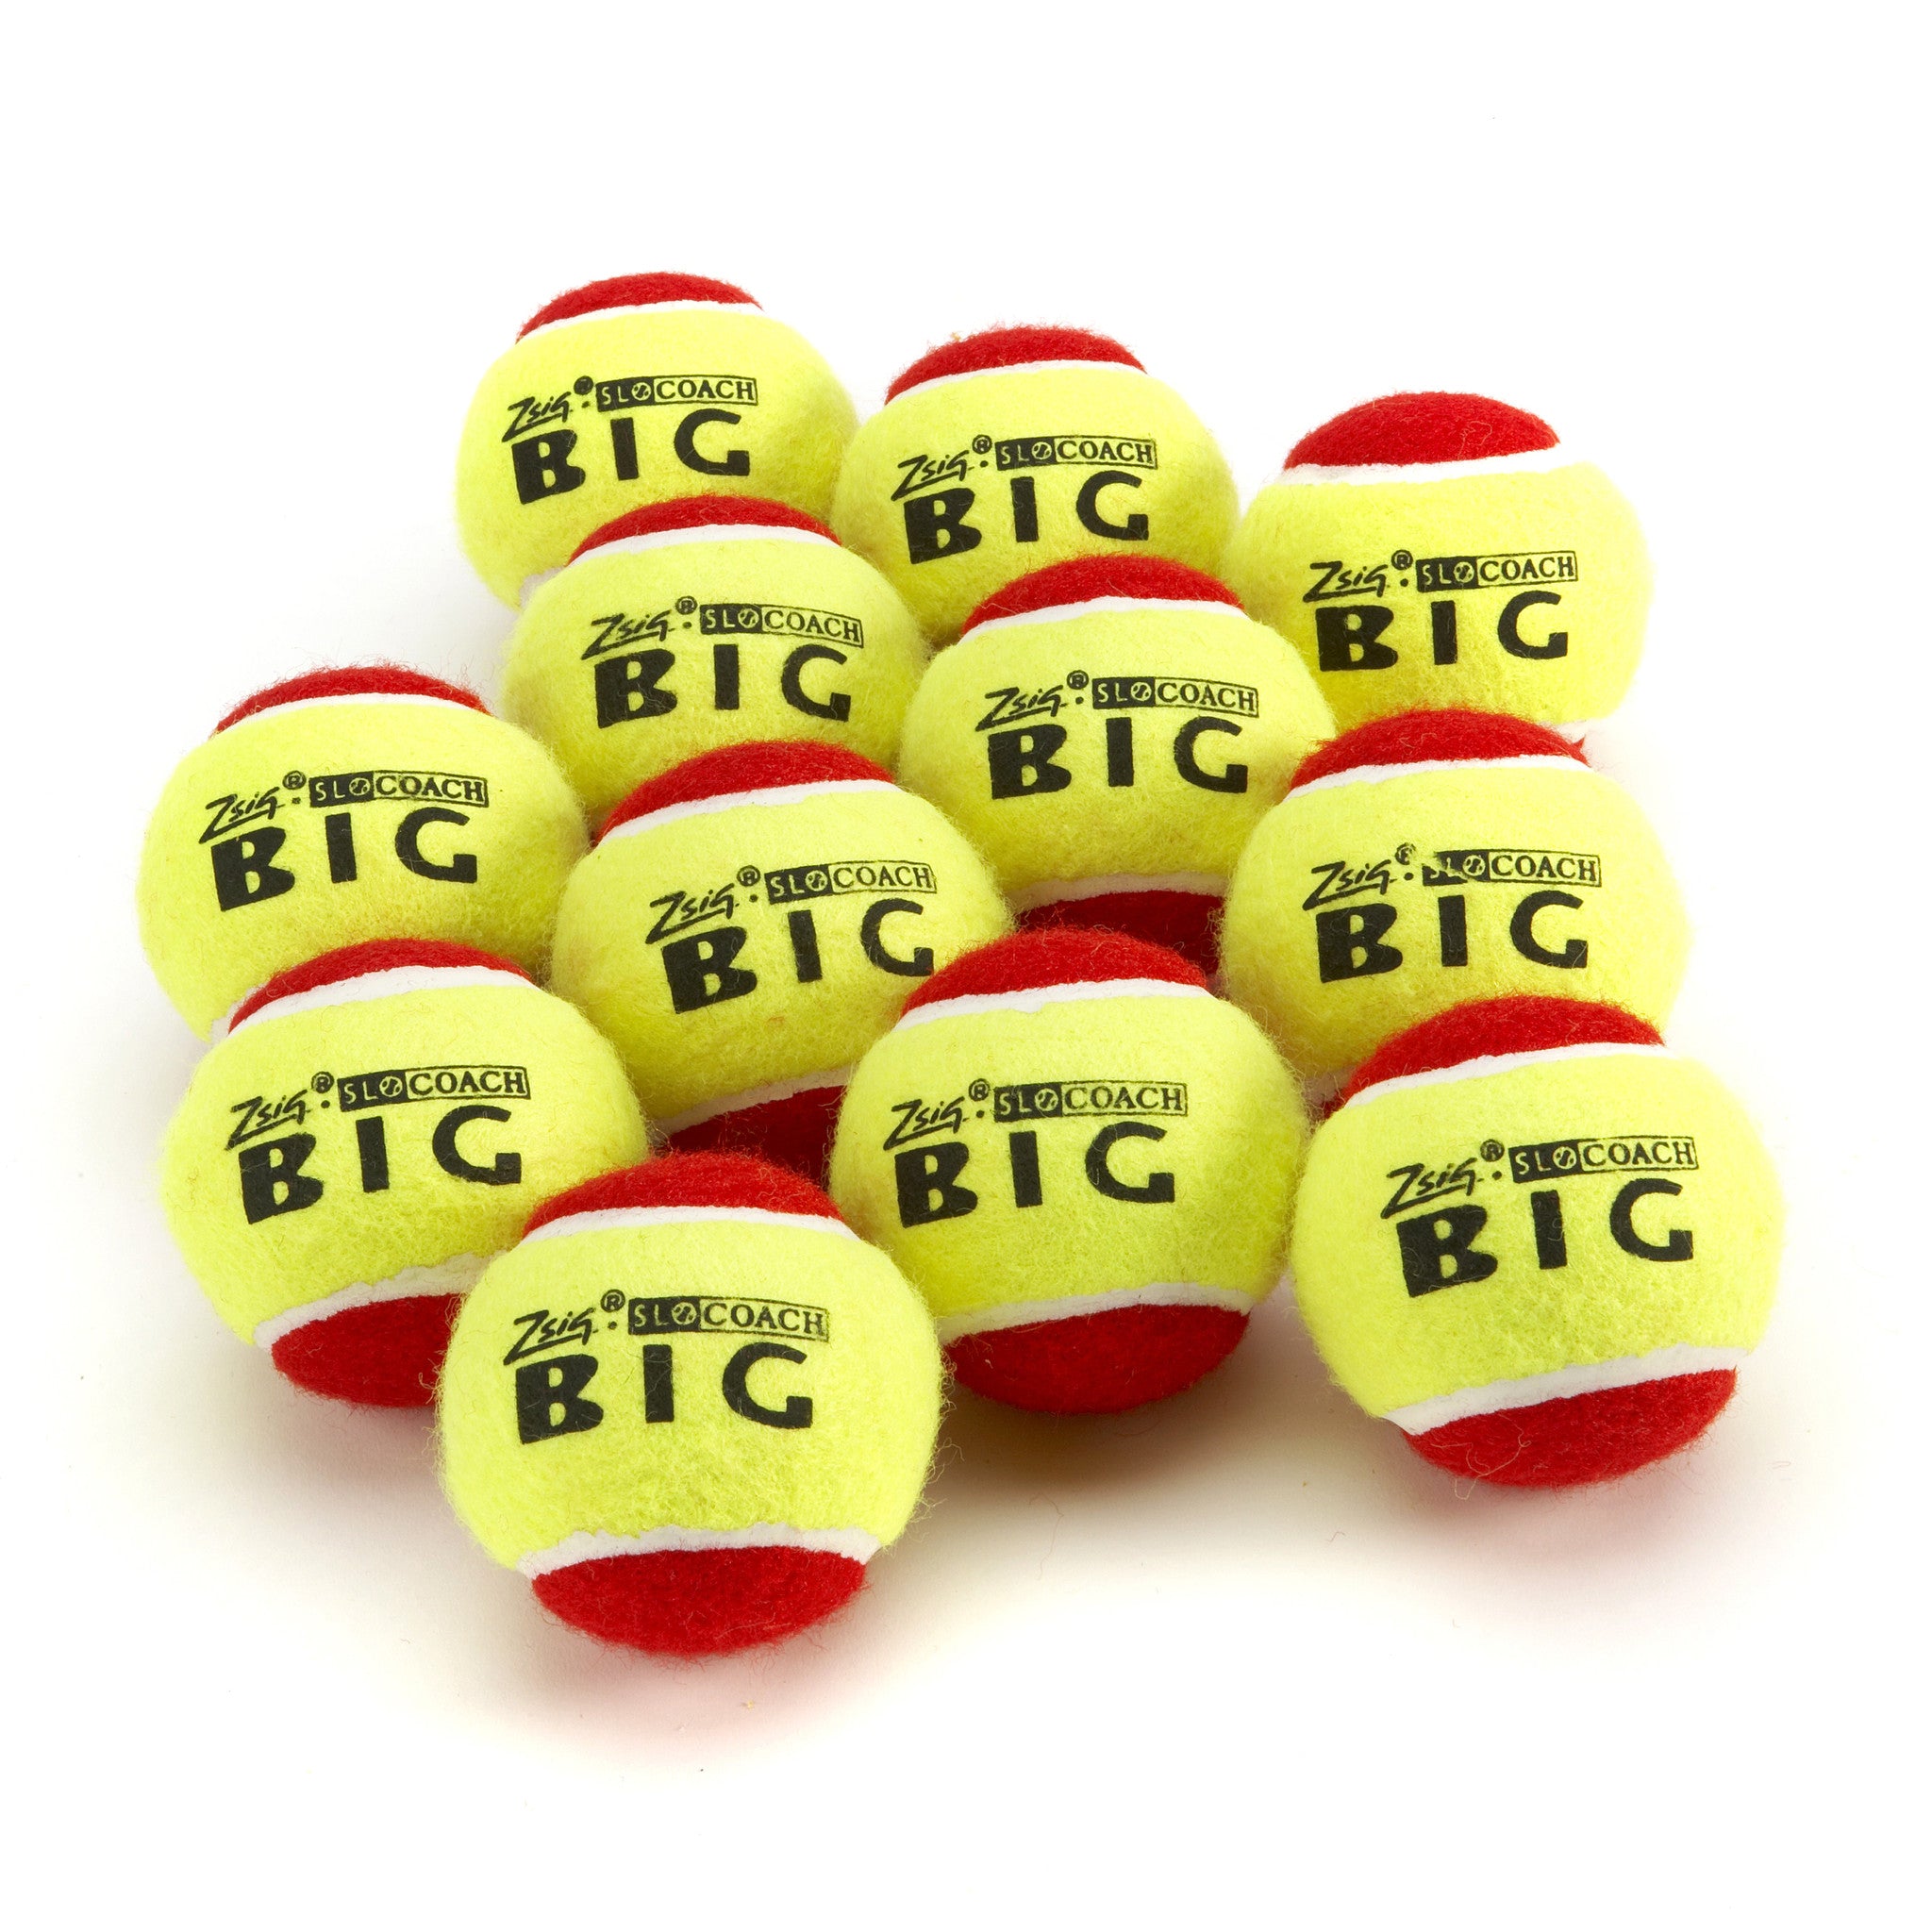 Mini Tennis Balls - a dozen Zsig Slocoach Big Red balls for Stage 3 & Red Stage coaching